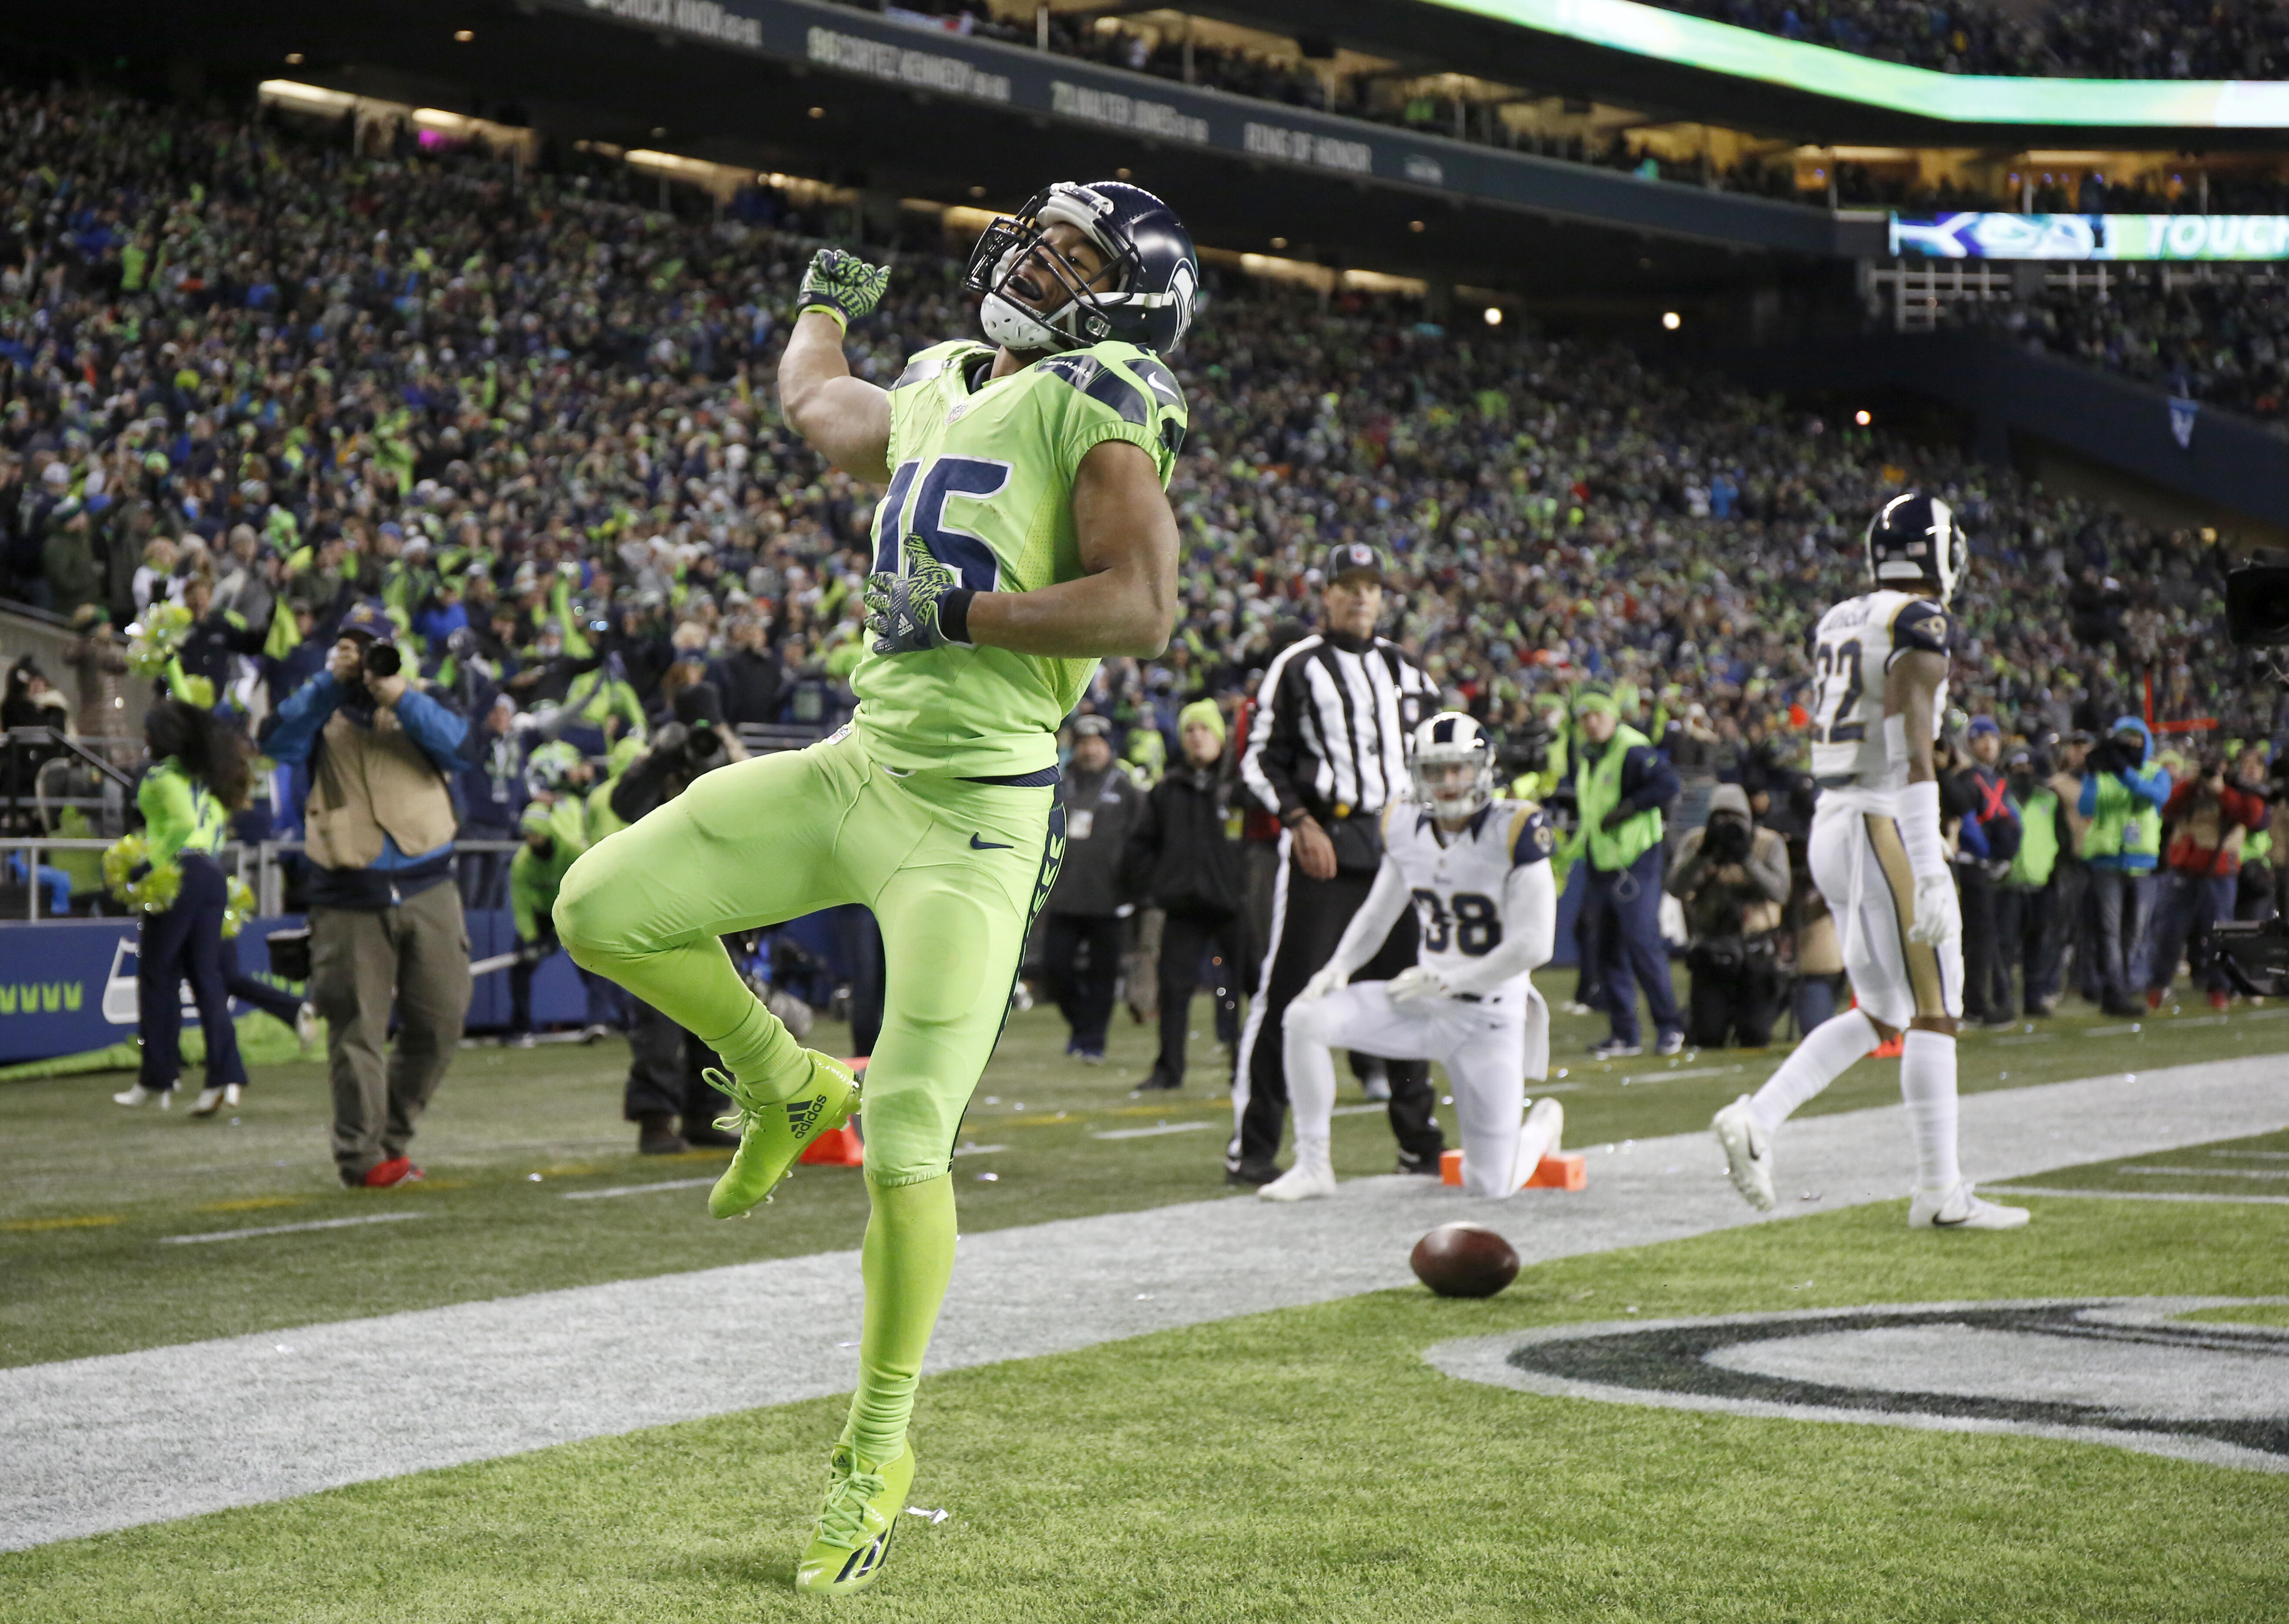 SEATTLE, WA - DECEMBER 15:  Wide receiver Tyler Lockett #16 of the Seattle Seahawks celebrates after scoring a touchdown against the Los Angeles Rams at CenturyLink Field on December 15, 2016 in Seattle, Washington.  (Photo by Otto Greule Jr/Getty Images)